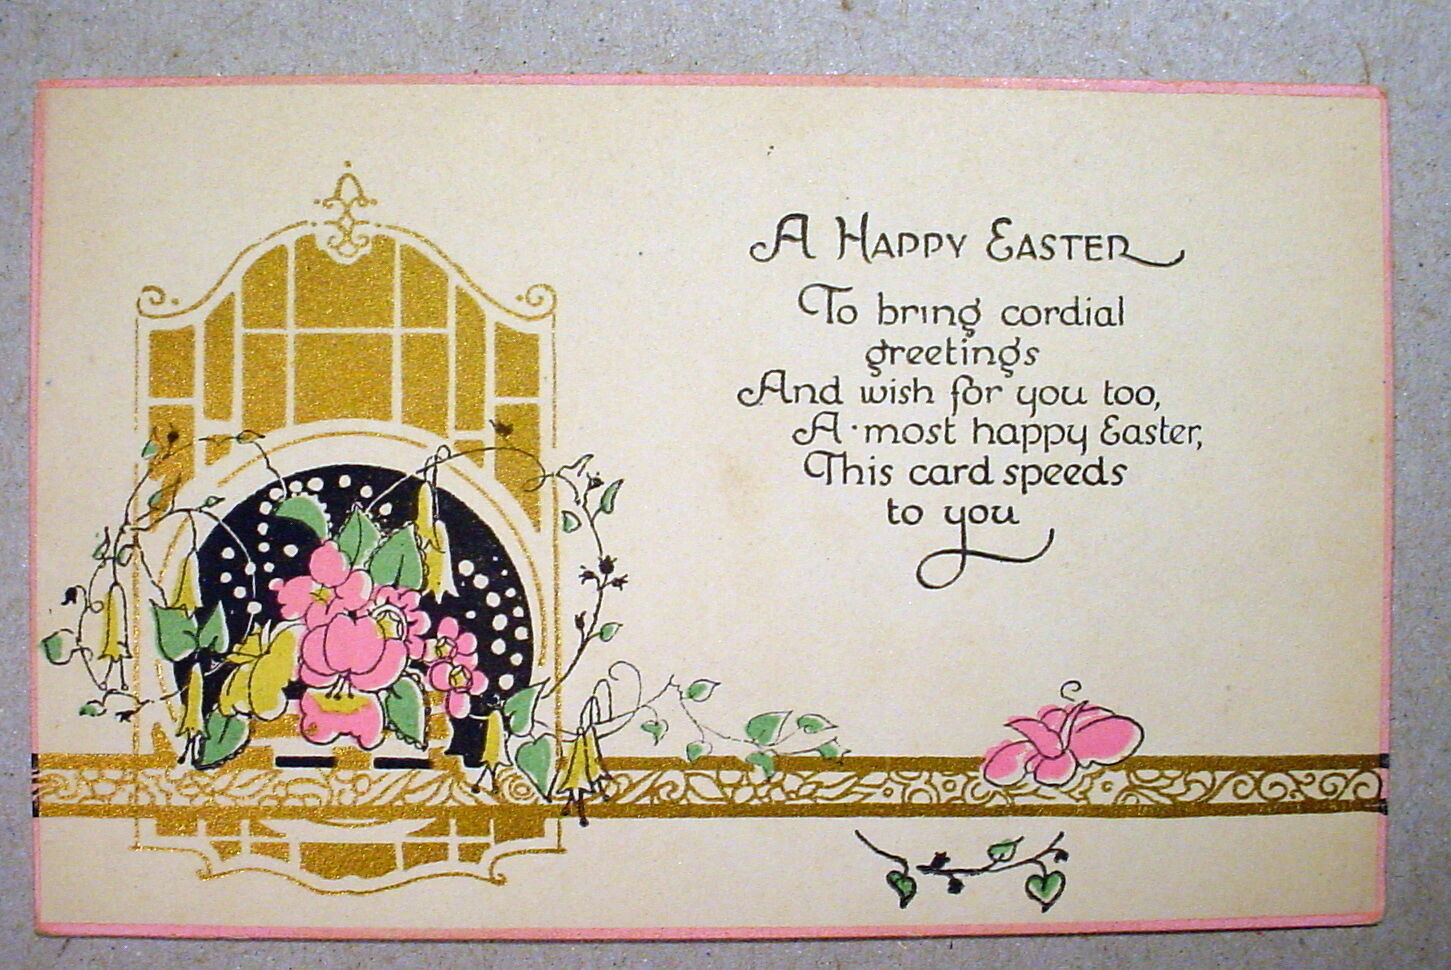 Happy Easter Cordial Greetings Gold Details Rare Old Vintage Card 910